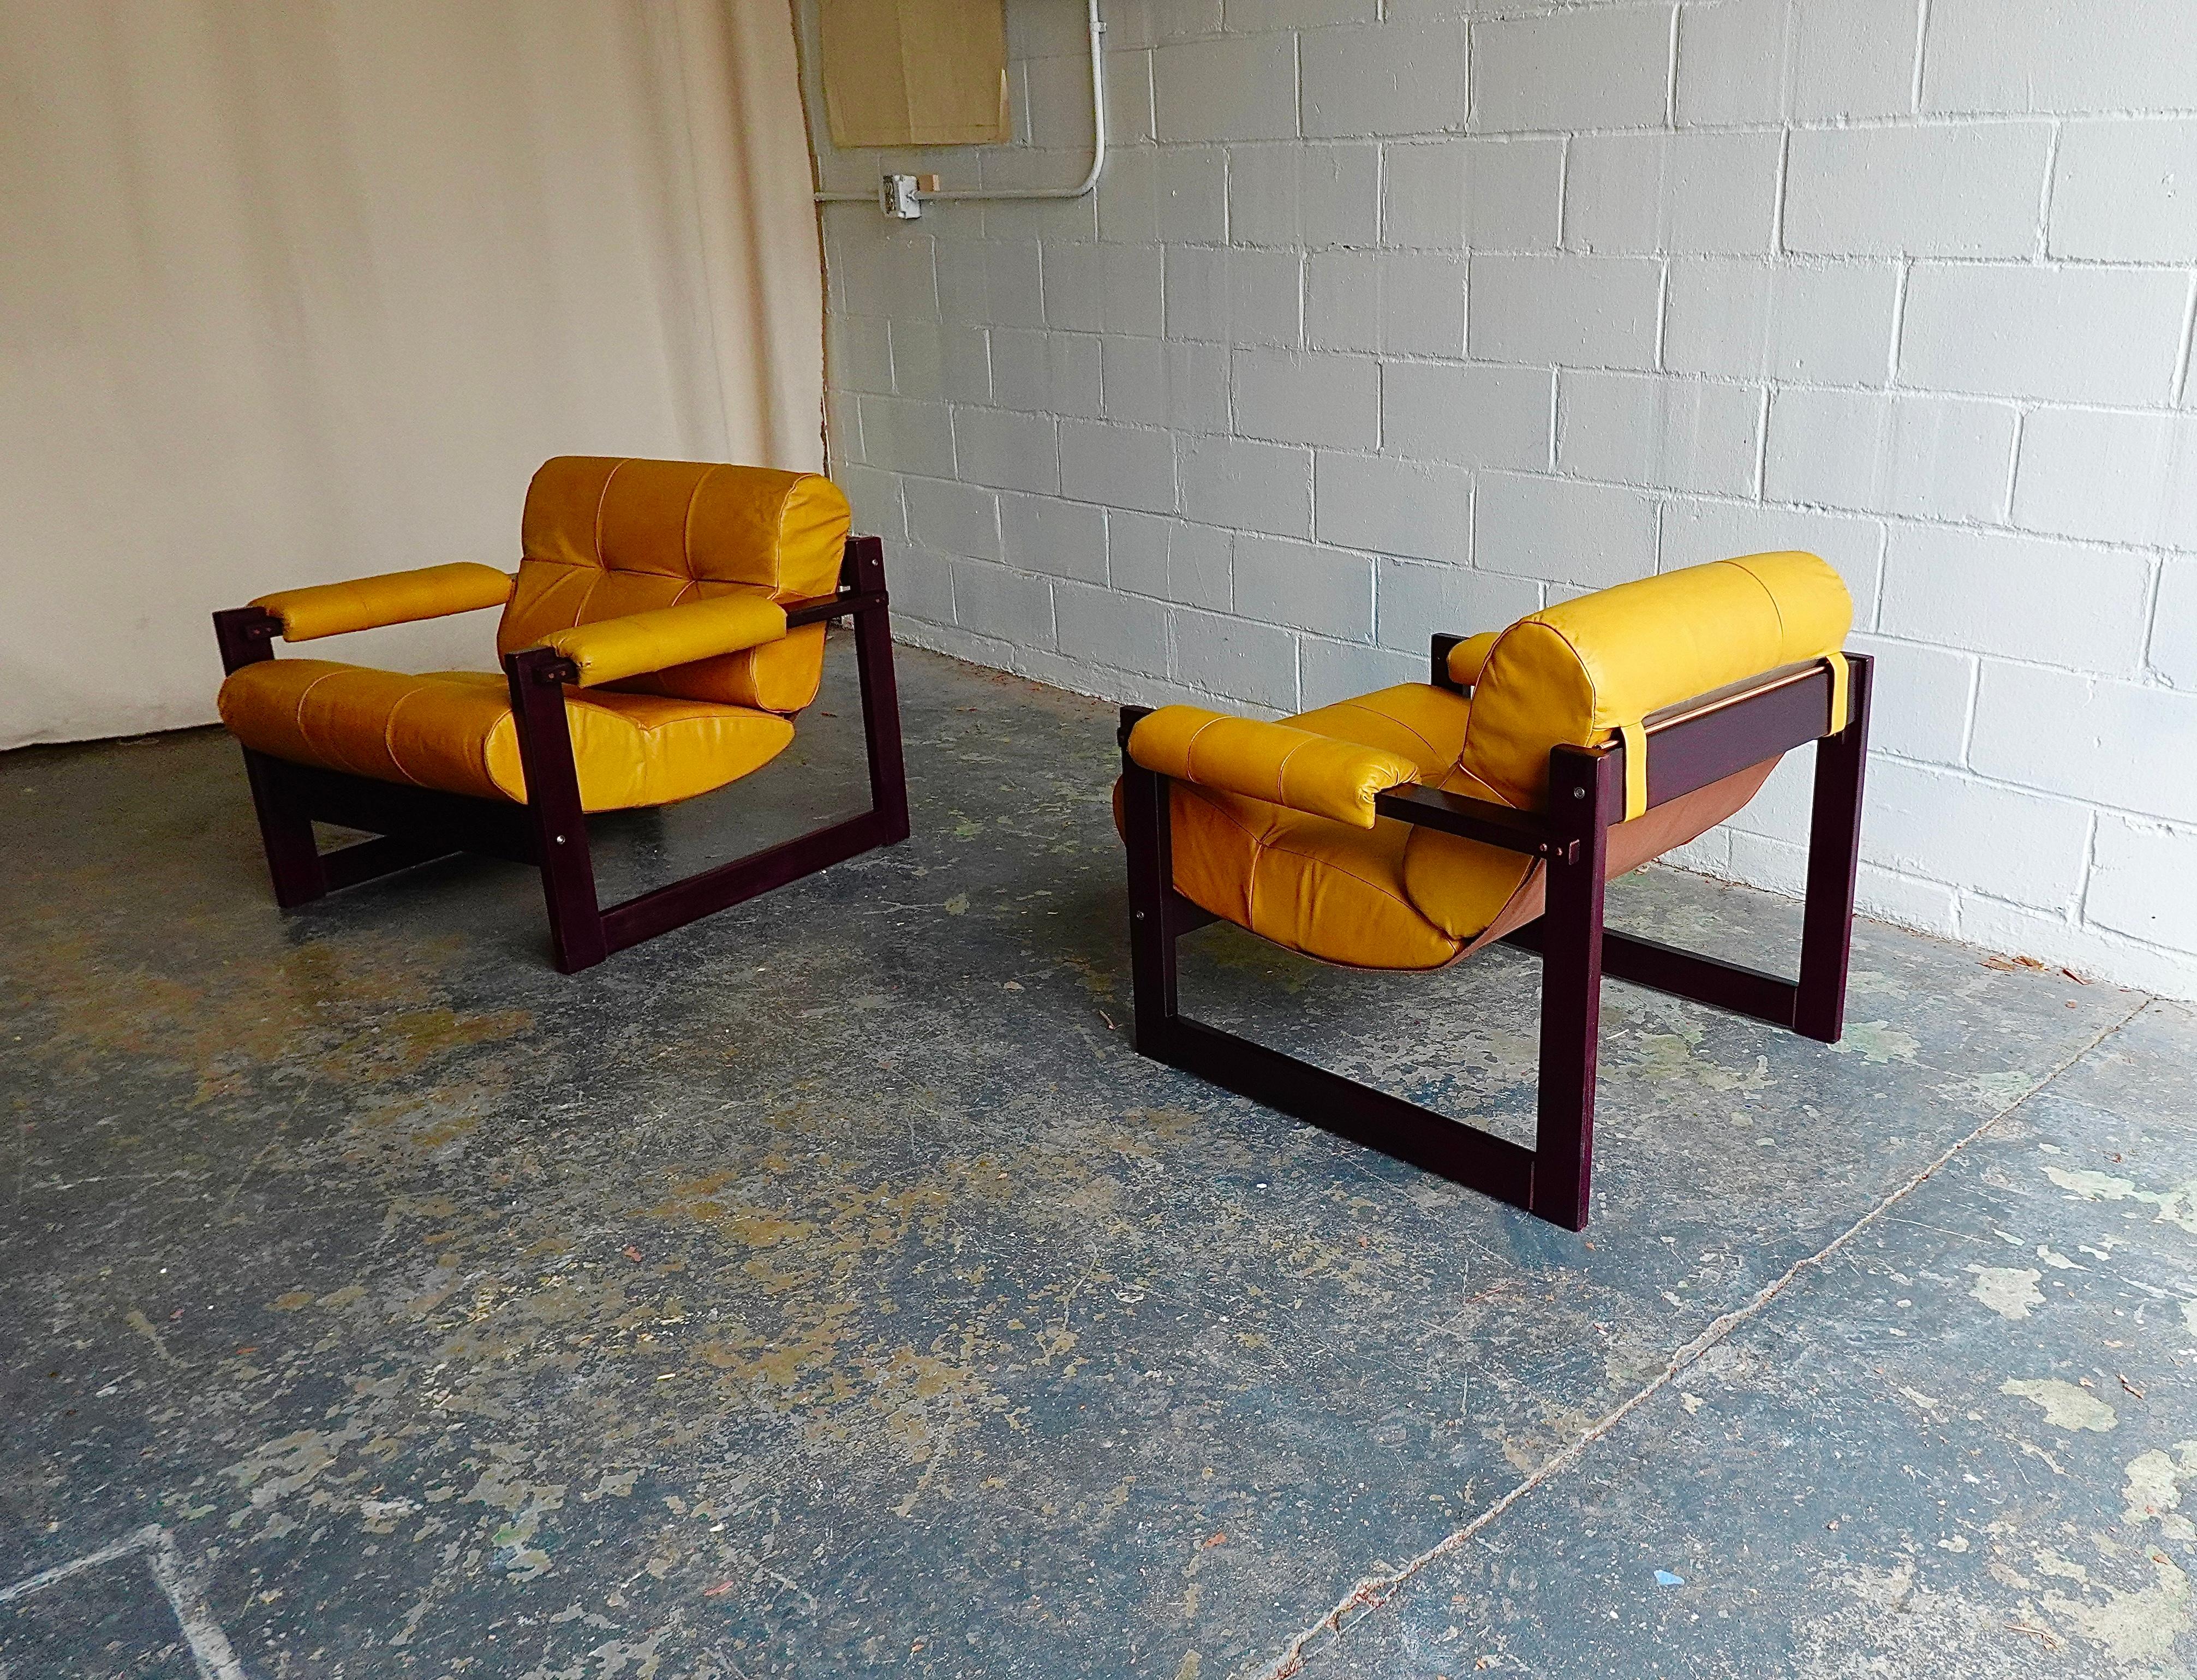 Pr. Percival Lafer MP-167 Lounge Chairs in Jatoba & Leather, 1970s For Sale 2